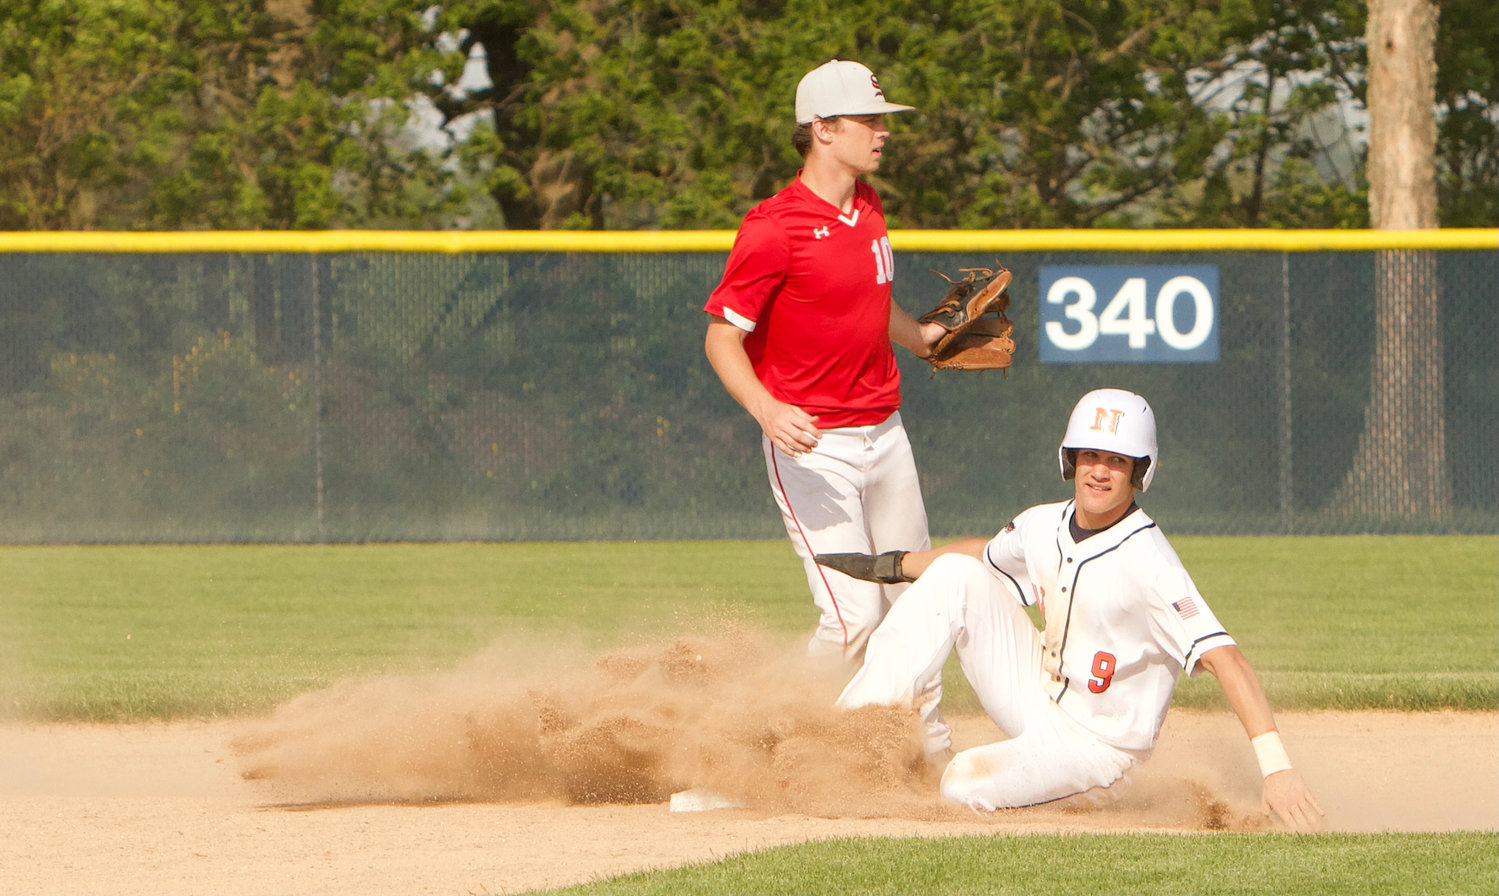 Gage Galloway slides into second base.